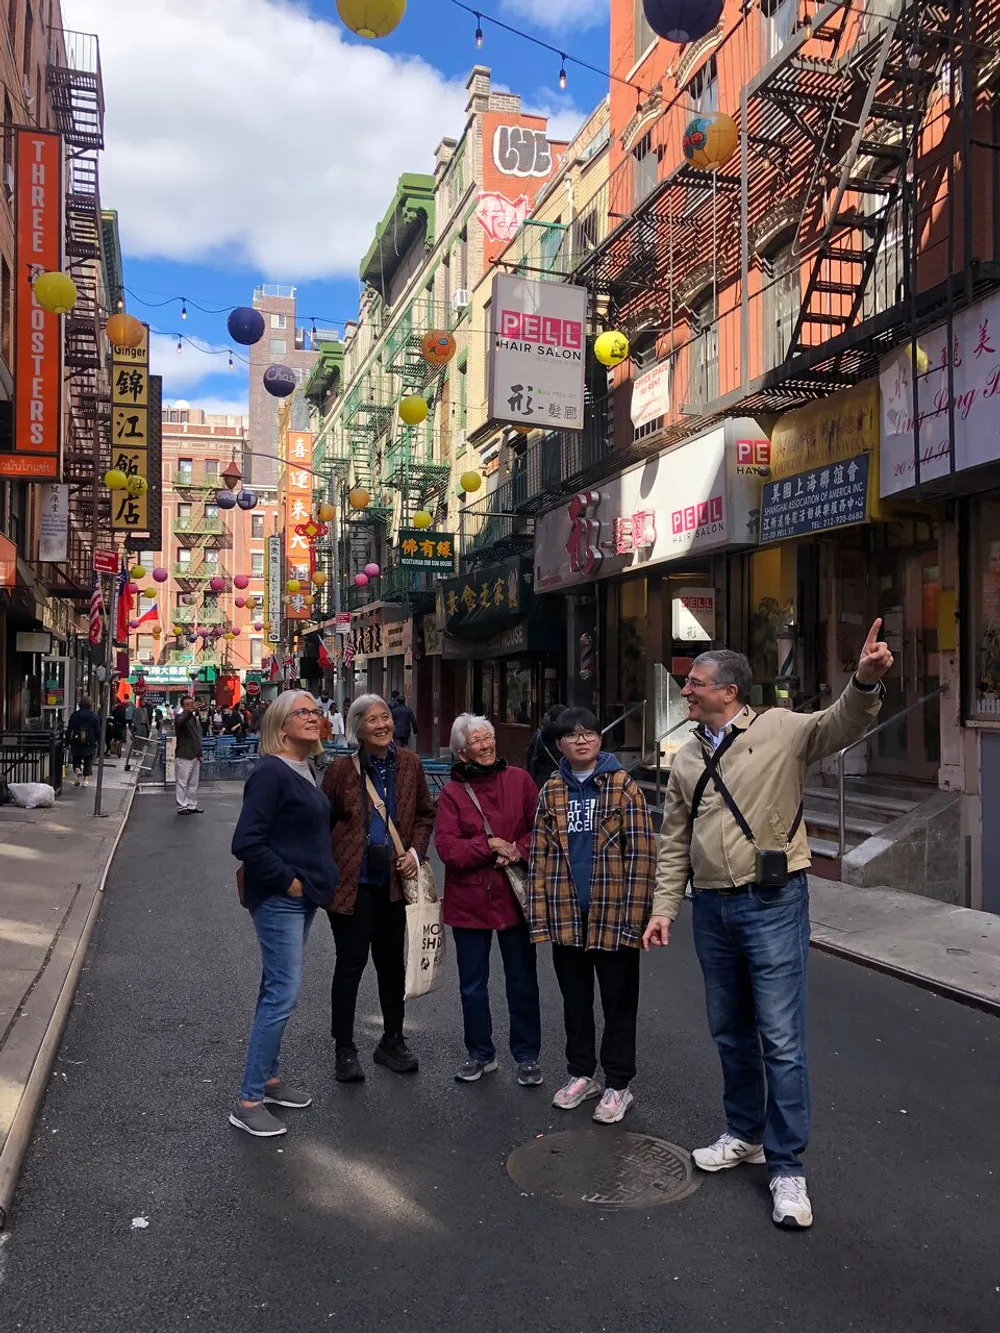 A group of five adults appears to be on a tour listening to a man pointing out something of interest in a vibrant street that is likely part of a Chinatown district flanked by colorful signage and traditional lanterns